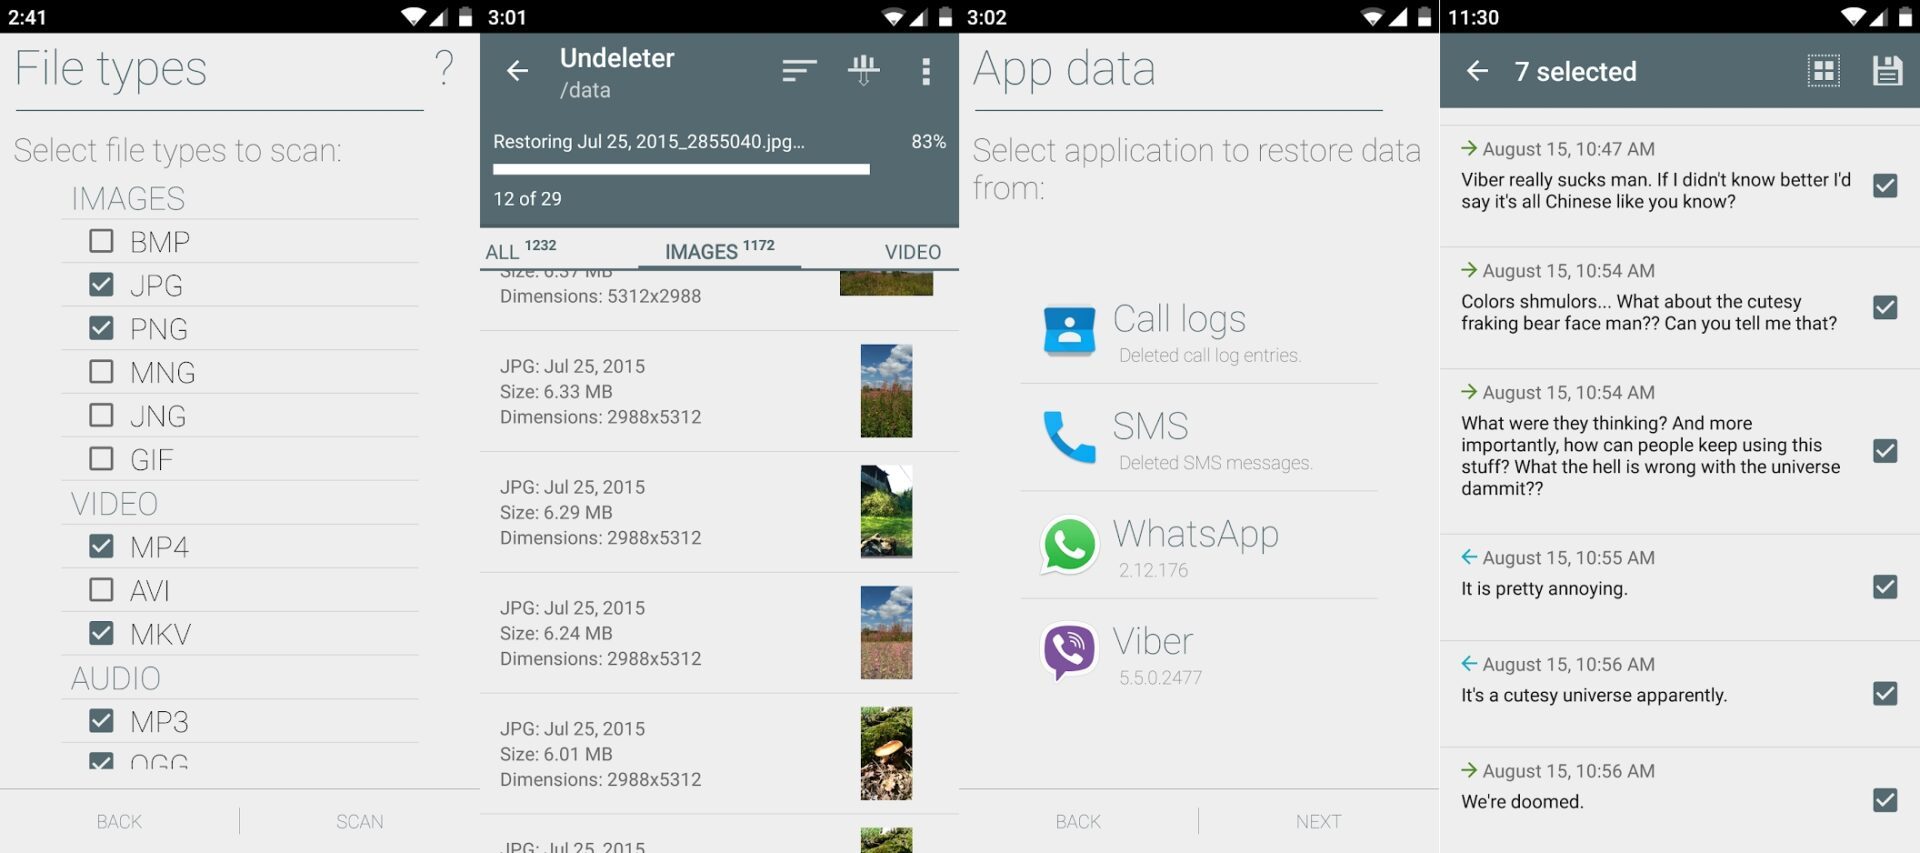 Undeleter Recover files and data